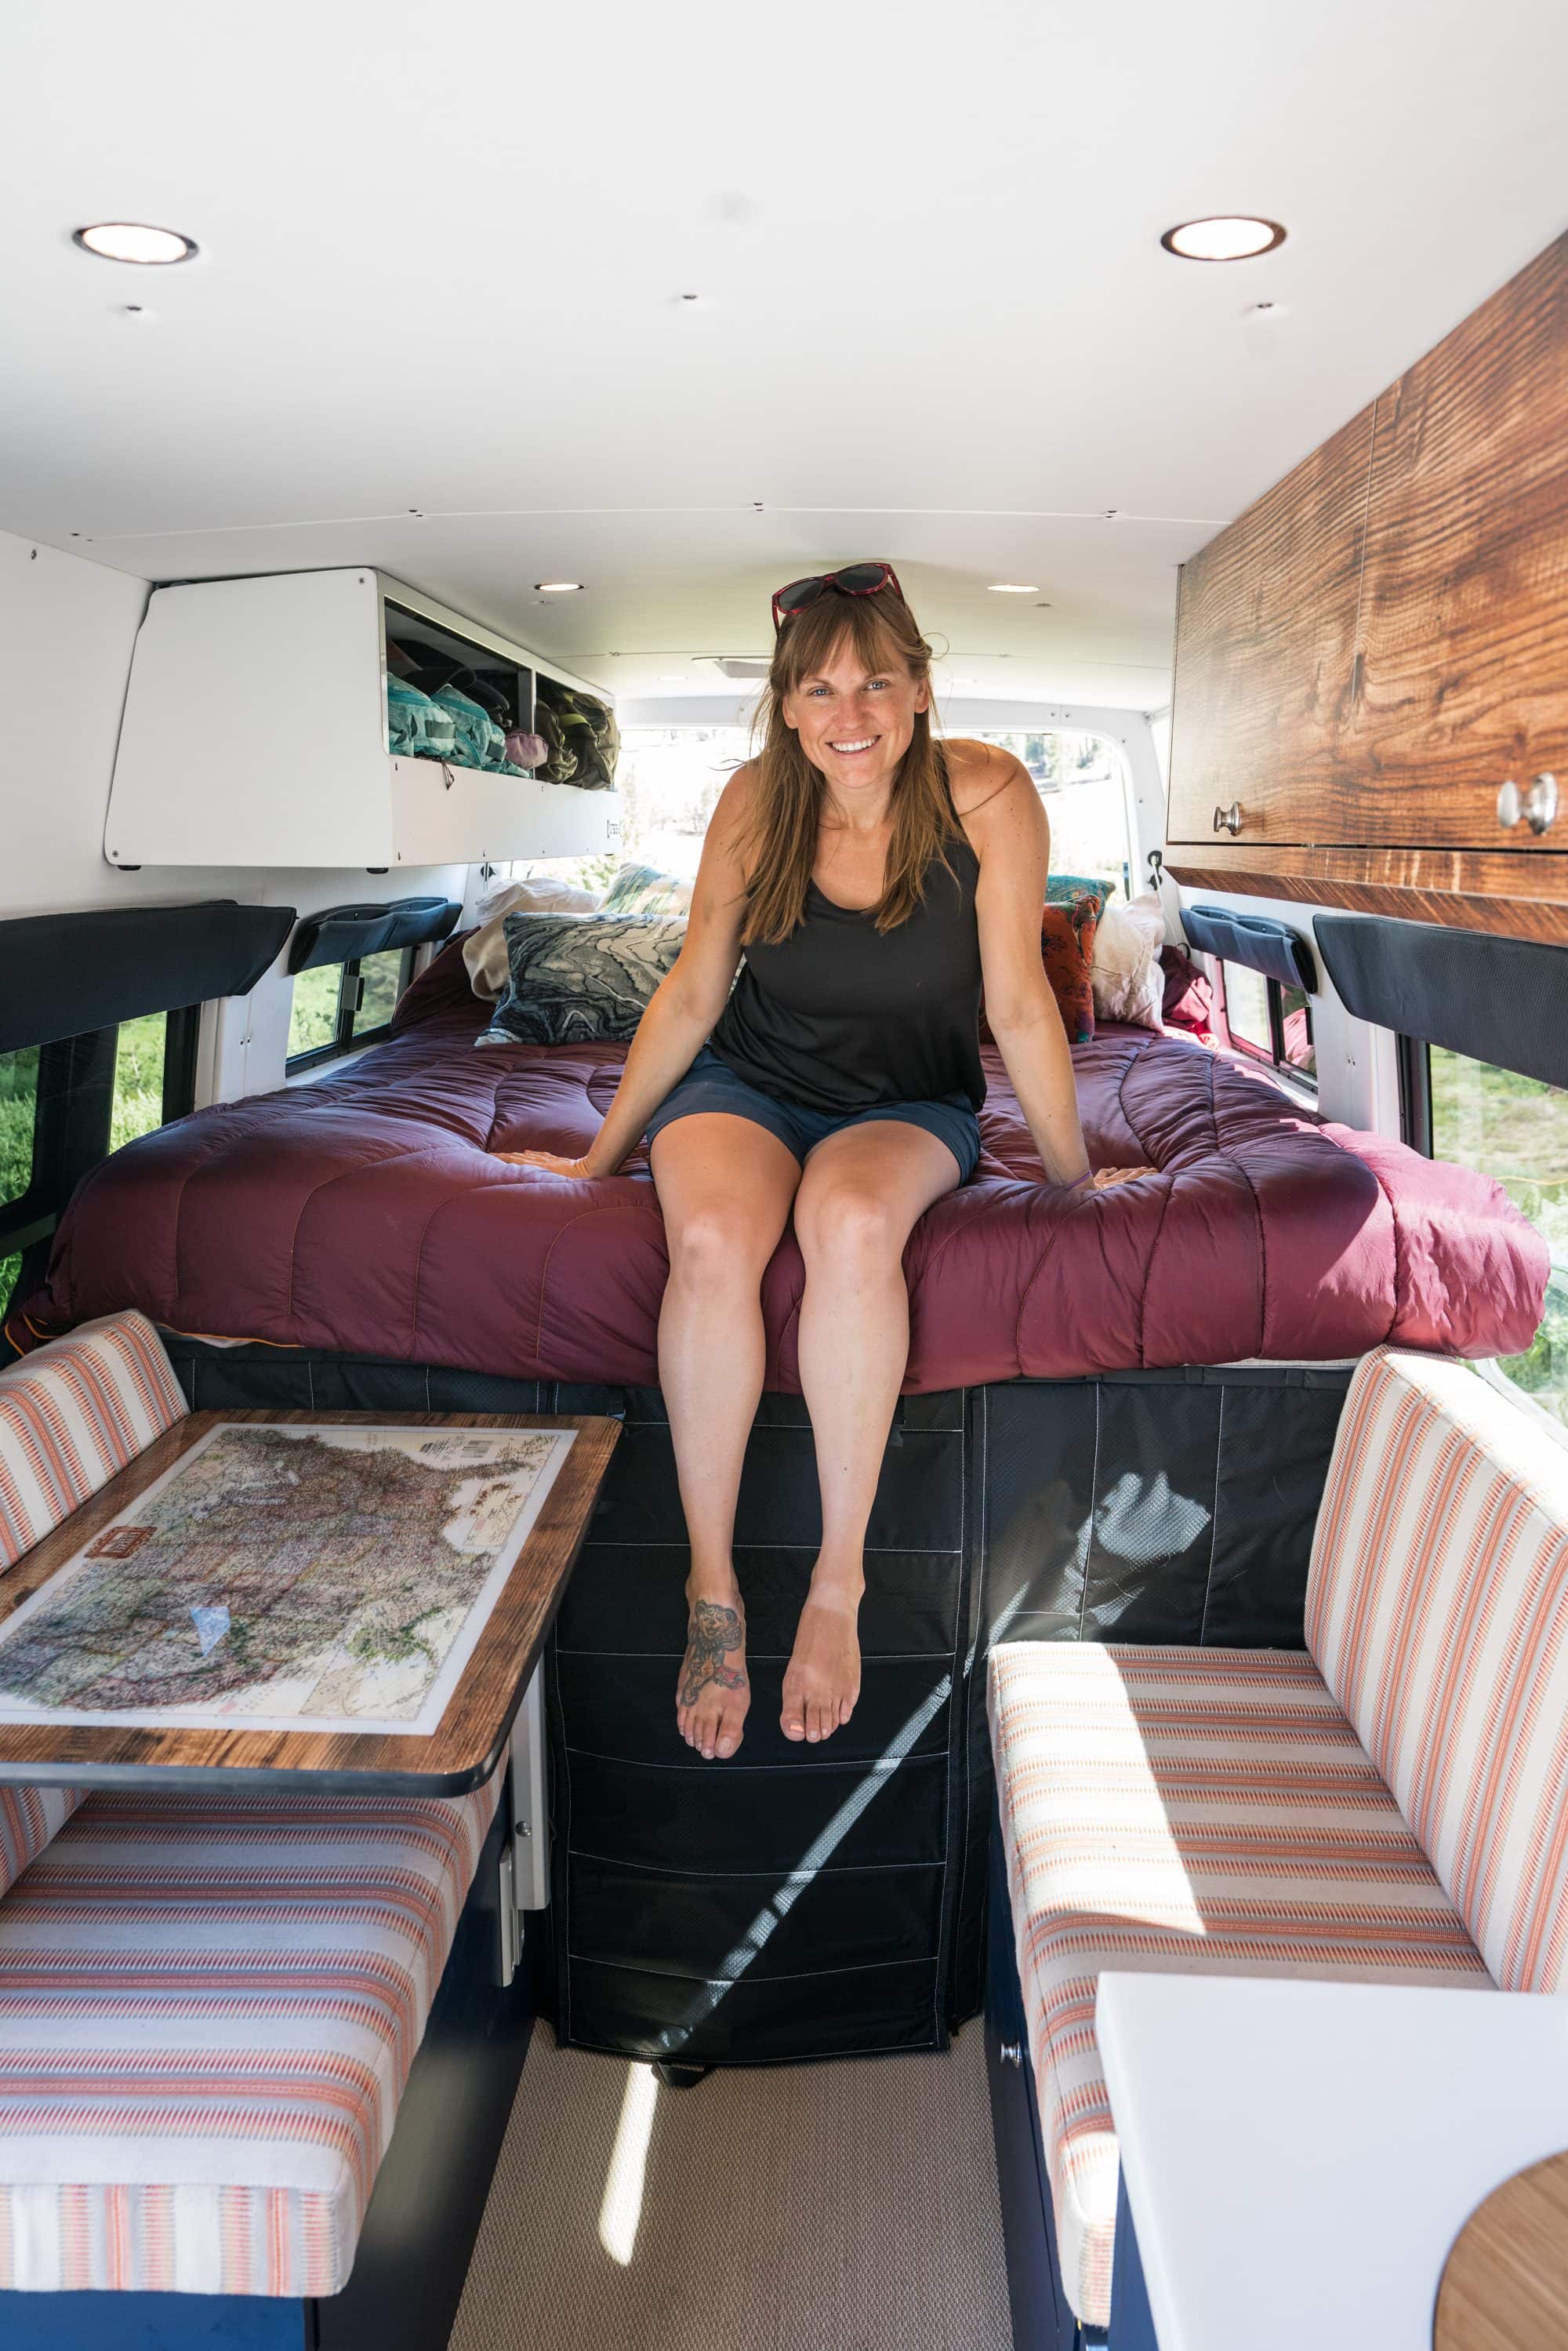 Tour Bearfoot Theory’s Outside Van Sprinter Van conversion. This 4x4 170” Sprinter camper has everything you need for off-the-grid vanlife adventures.